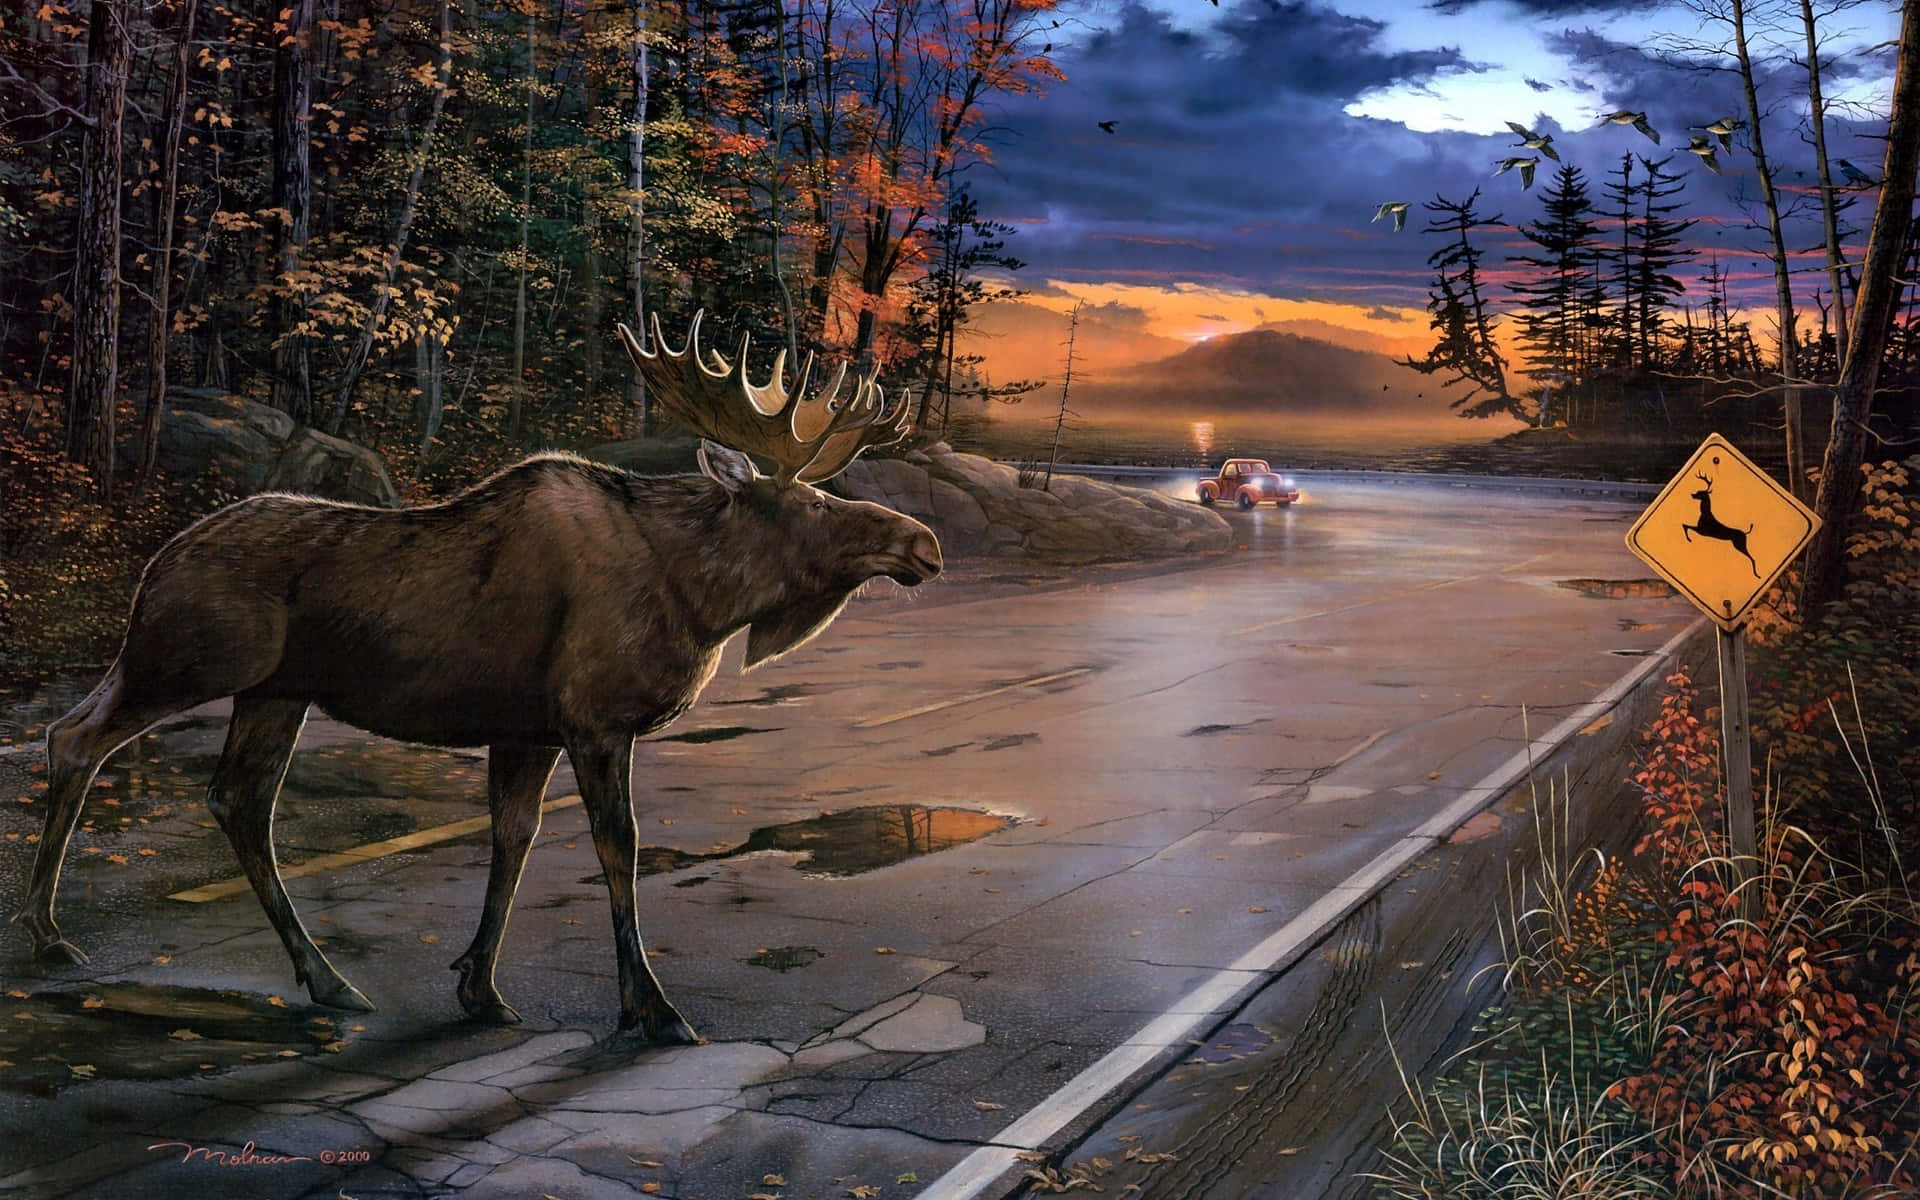 a moose standing on the road